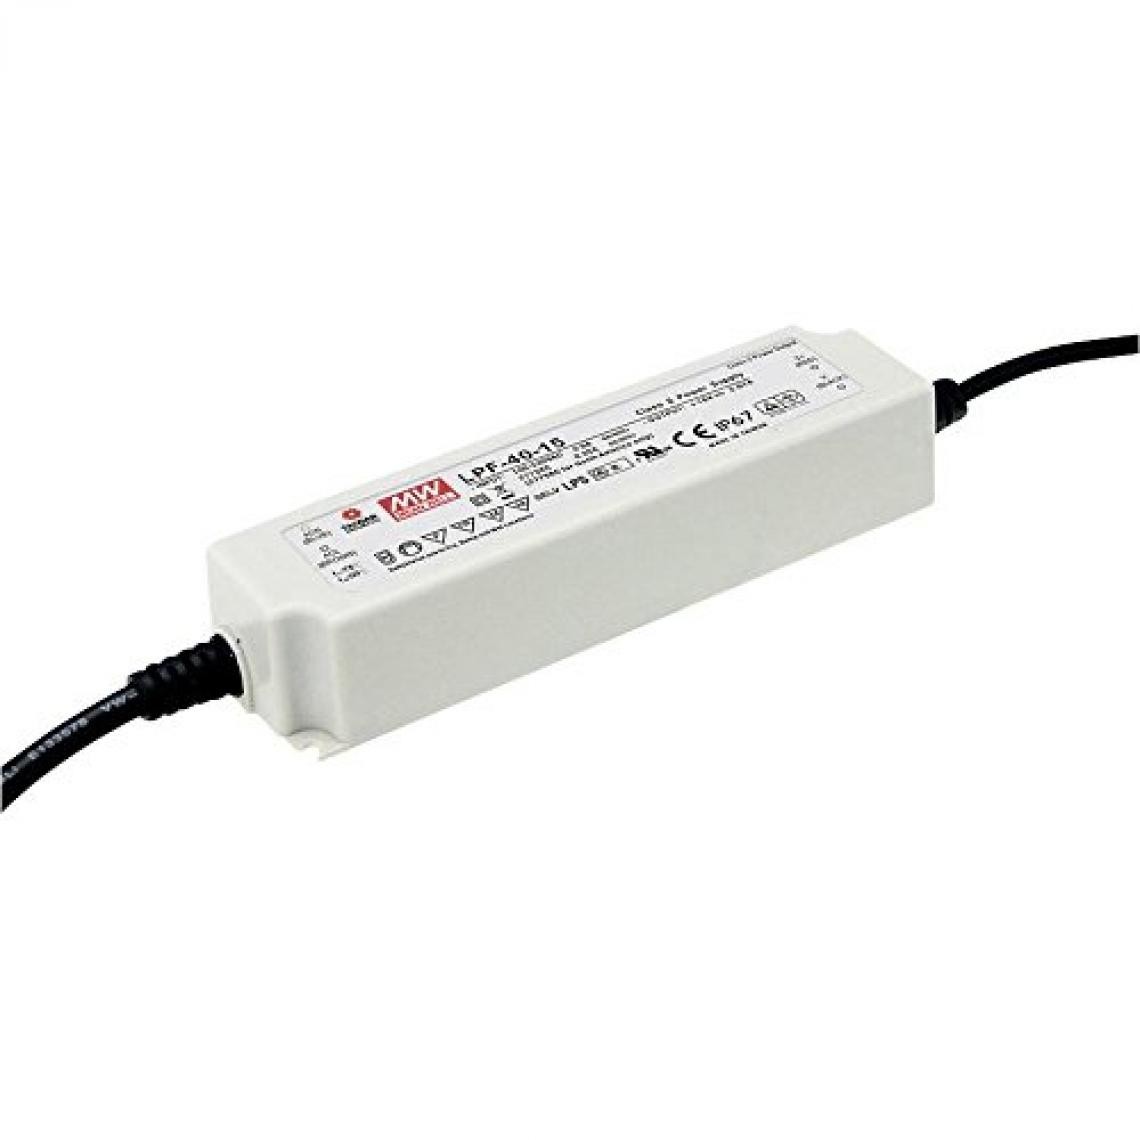 Inconnu - Driver LED Mean Well LPF-40-12 40 W 12 V DC 3,34 A Tension fixe/courant constant - Boitier PC